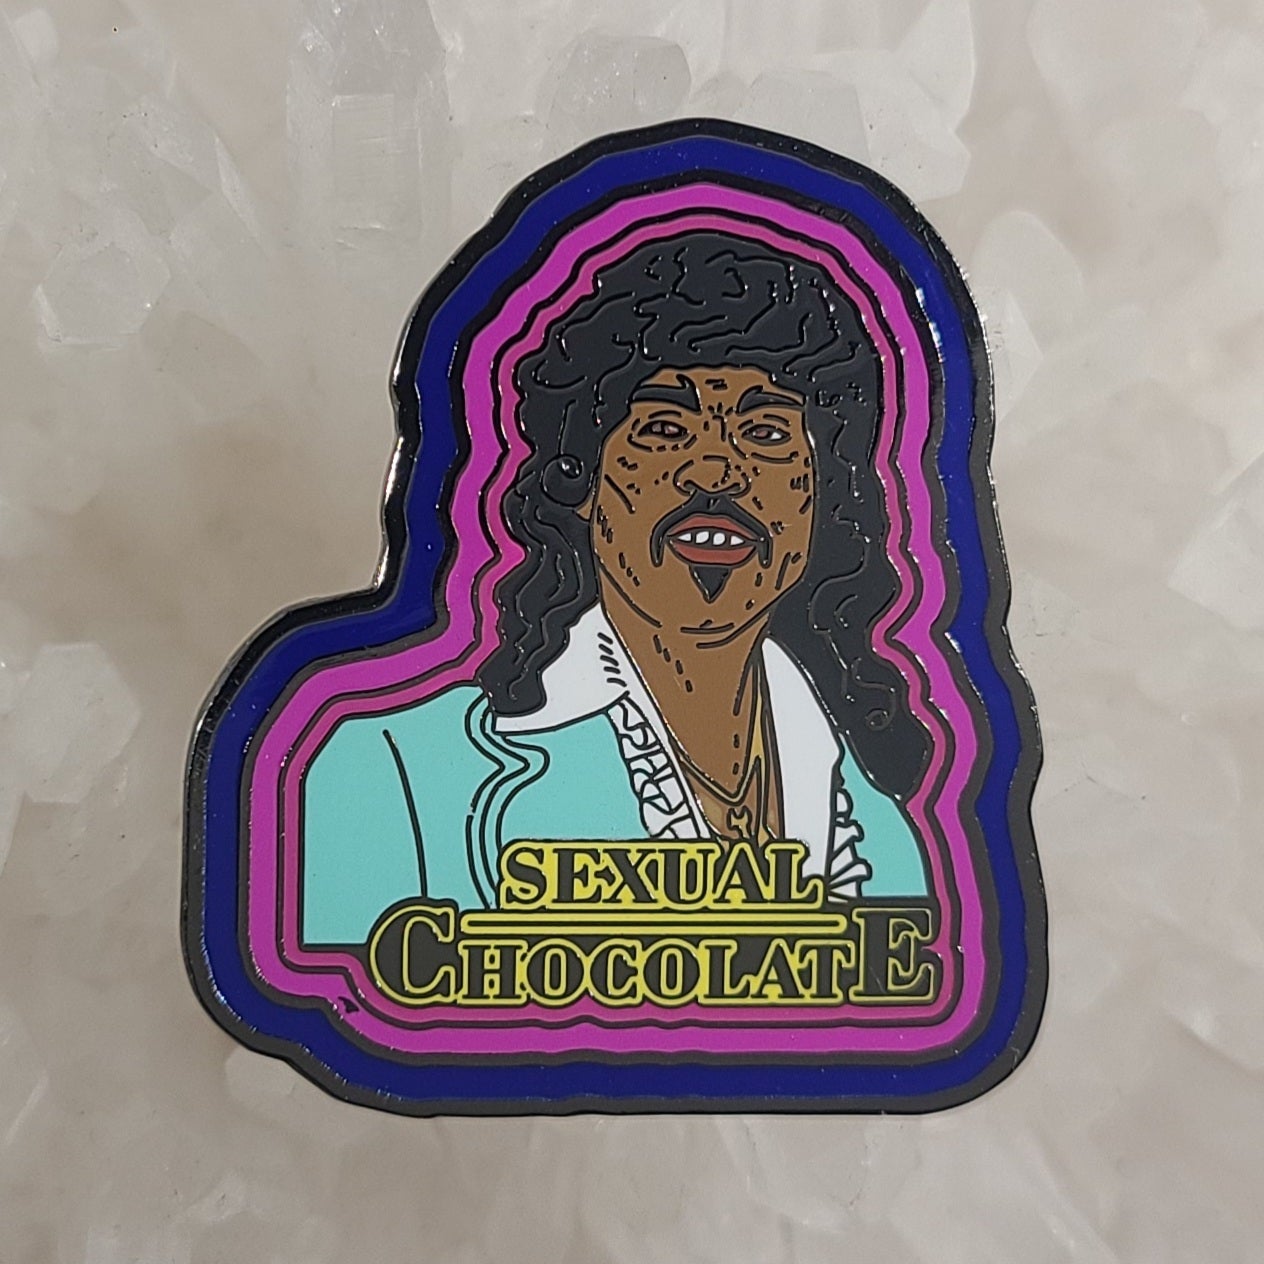 10 Pack - Sexual Chocolate Eddie Comedian Murphy Comedy Funny Wholesale Enamel Pins Hat Pins Lapel Pin Brooch Badge Festival Pin